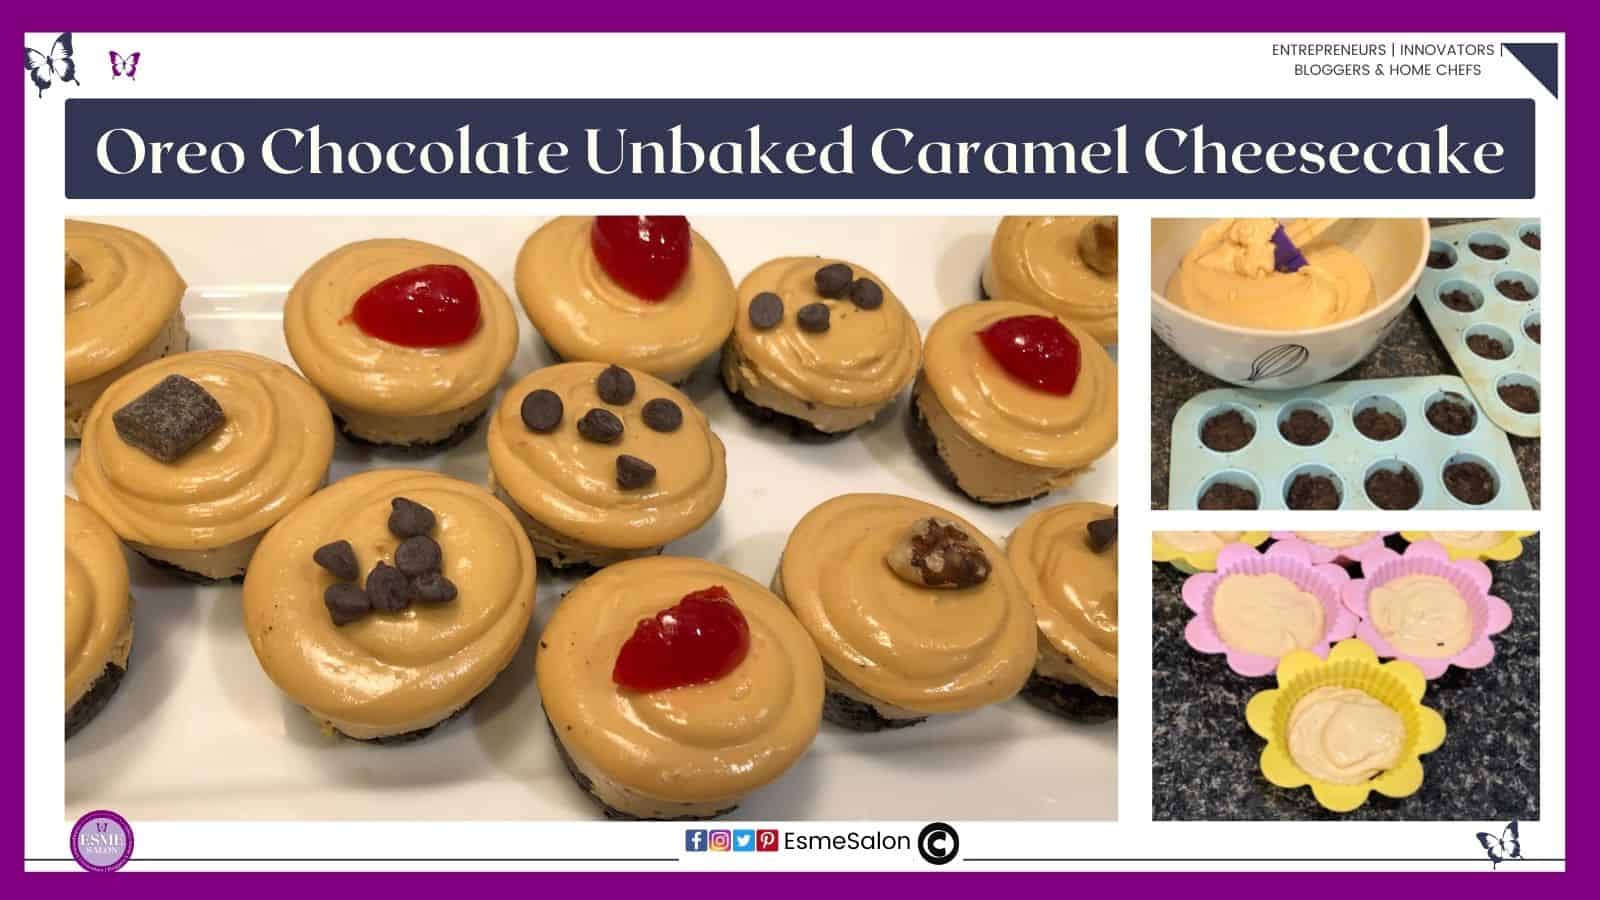 an image of small single serving Oreo Chocolate Unbaked Caramel Cheesecake decorated with cherries and chocolate morsels.